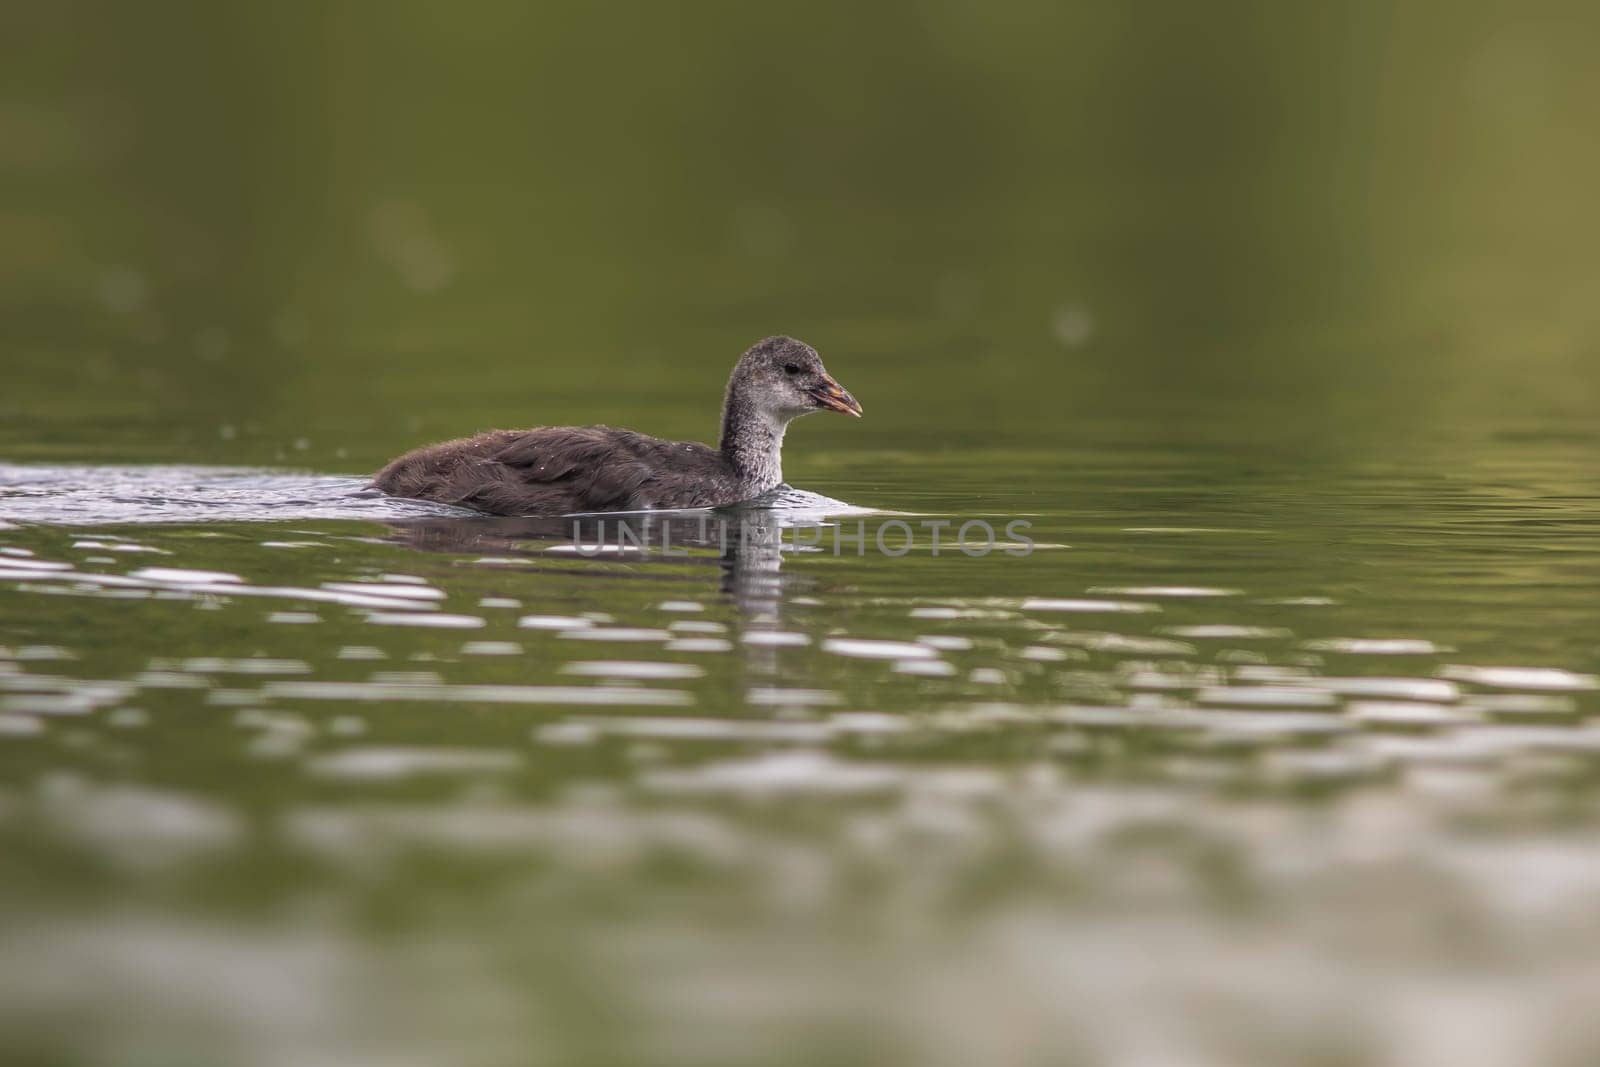 a young chick coot (Fulica atra) swims on a reflecting lake